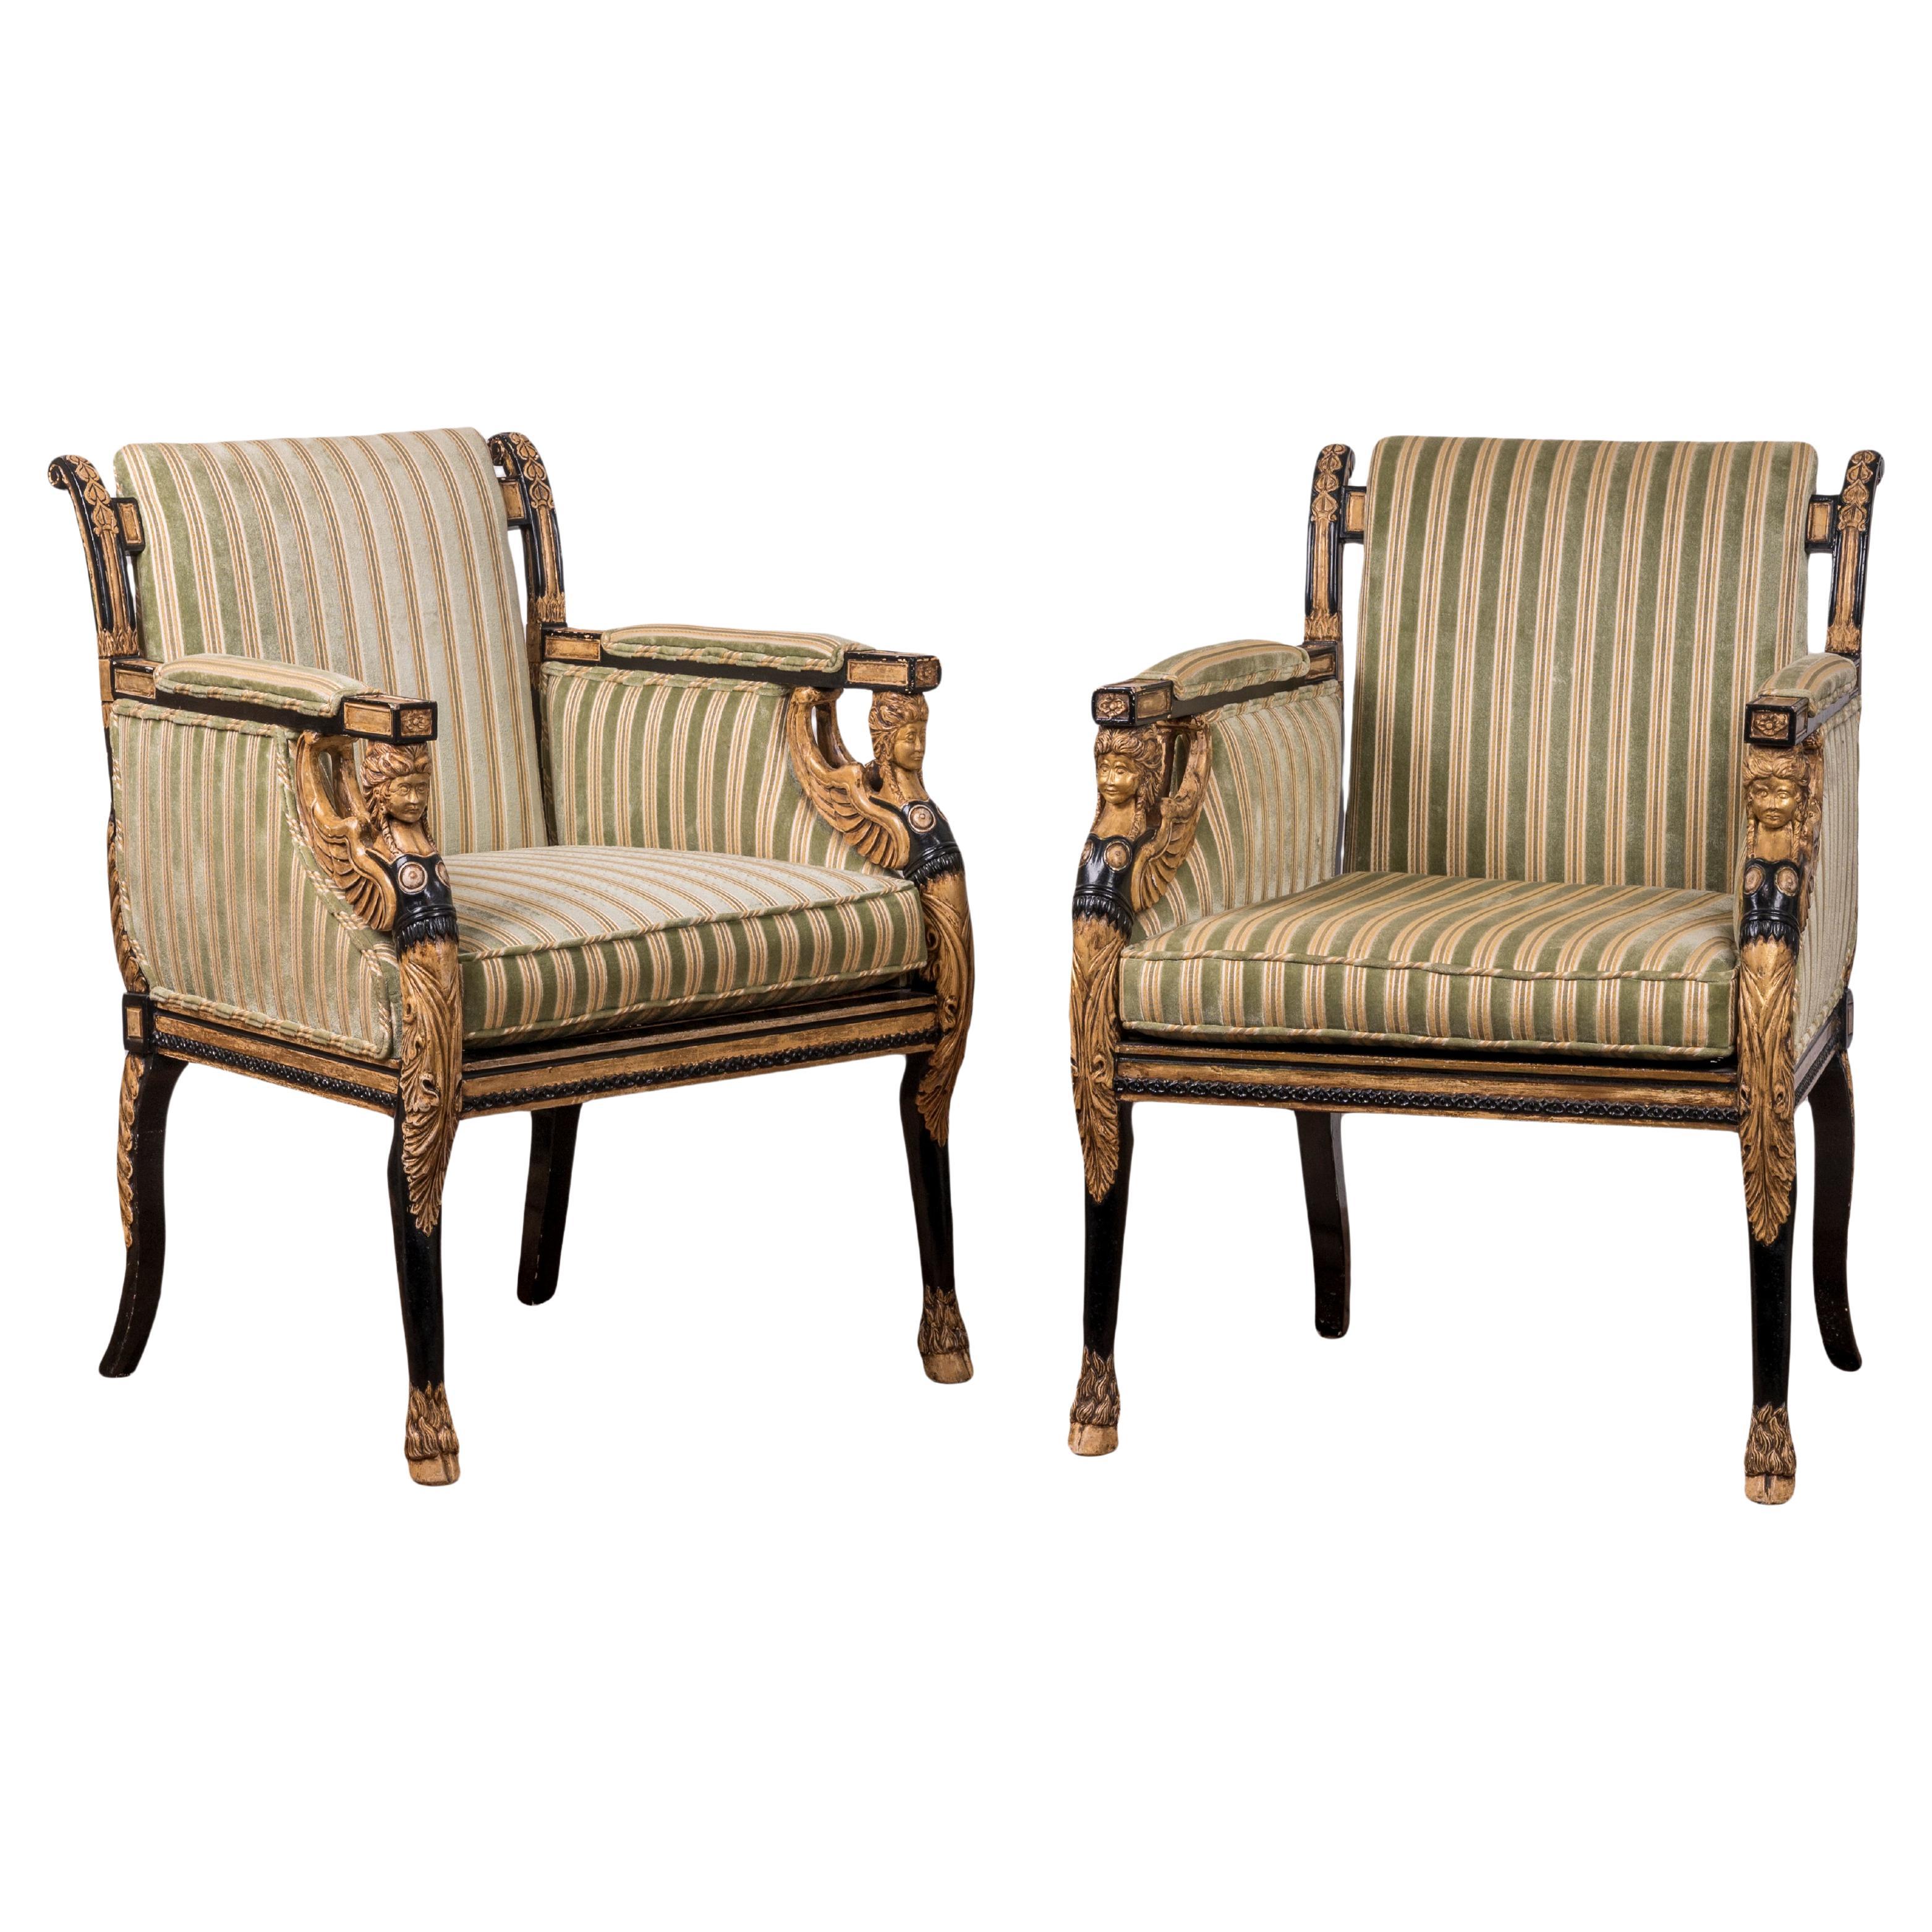 English Regency Style Ebonized and Parcel Gilt Chairs - A Pair For Sale